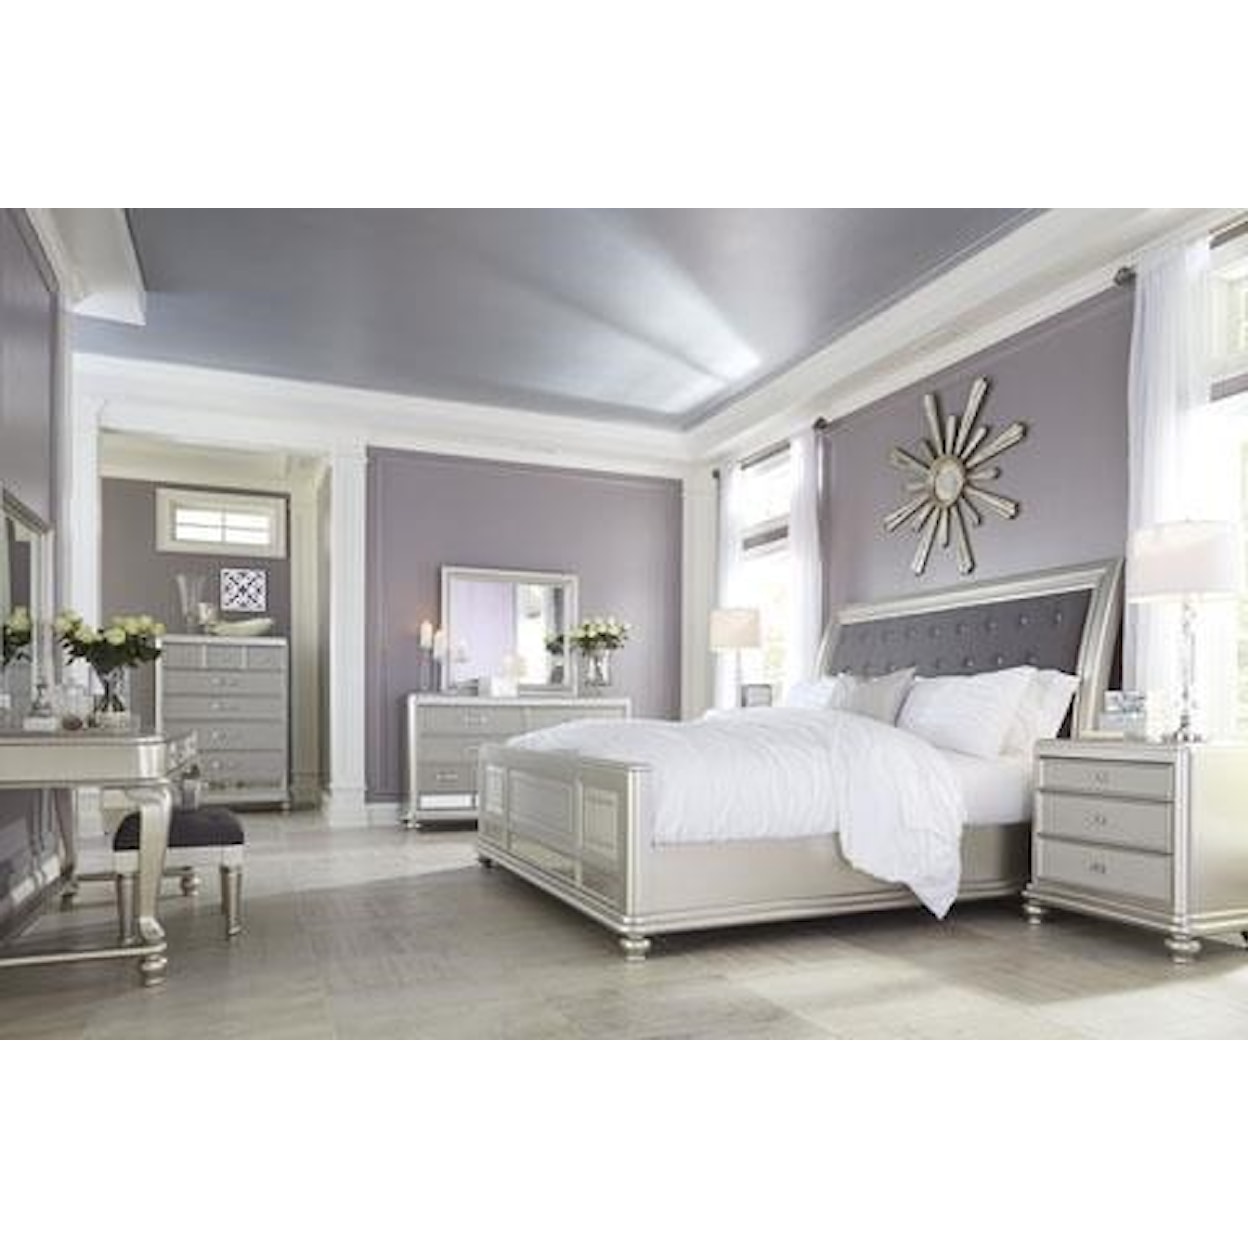 Signature Design by Ashley Coralayne 5PC Queen Bedroom Group